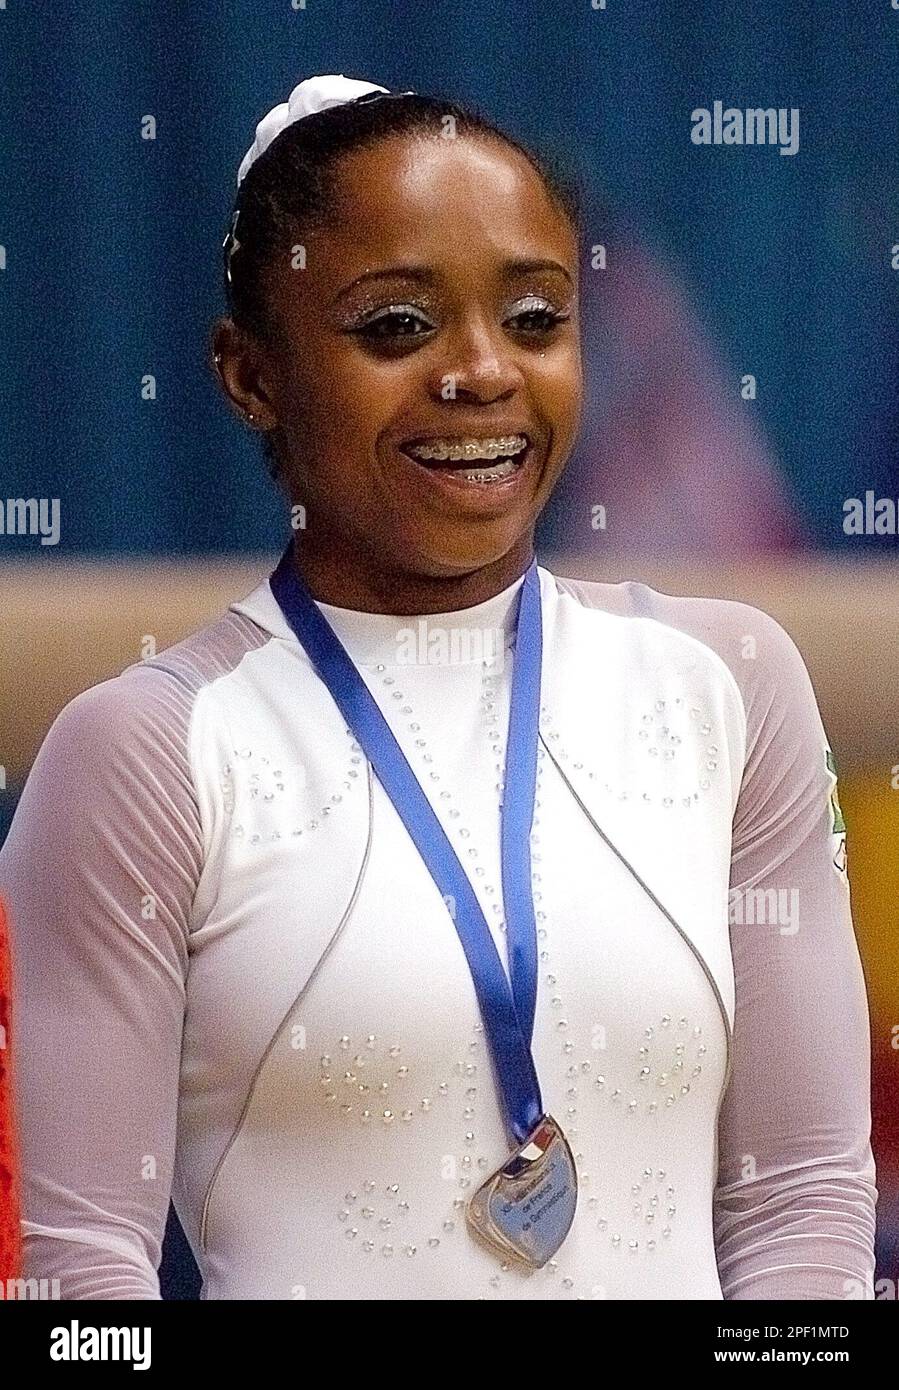 Daiane Dos Santos of Brazil smiles on the podium after winning the gold medal in the floor exercise, during the gymnastics world cup event held in Lyon, central France, Sunday March 14, 2004. (AP Photo/Patrick Gardin) Stock Photo